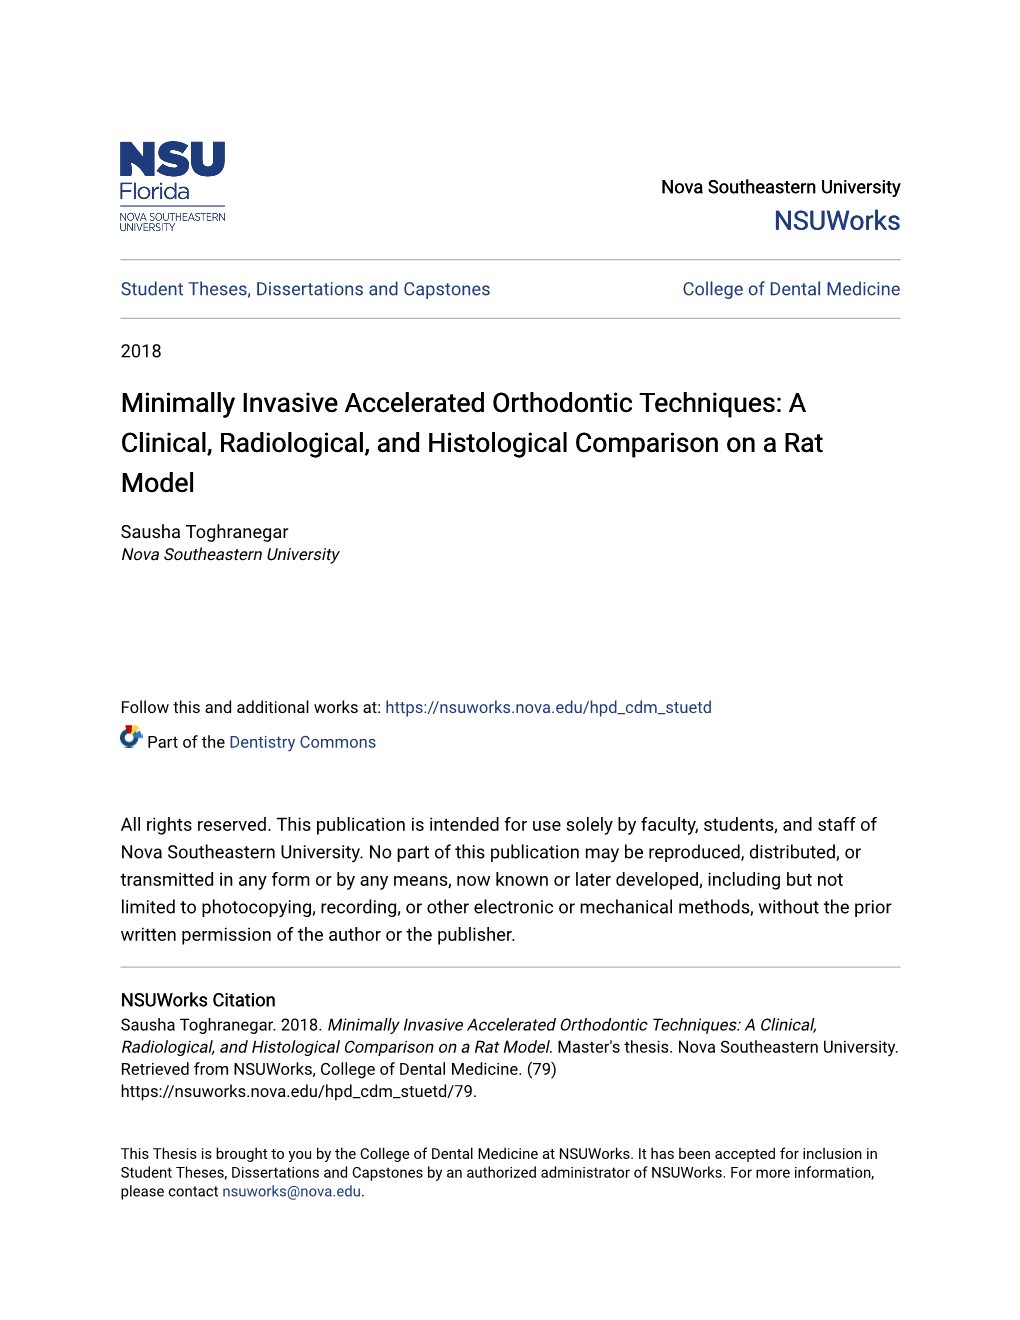 Minimally Invasive Accelerated Orthodontic Techniques: a Clinical, Radiological, and Histological Comparison on a Rat Model